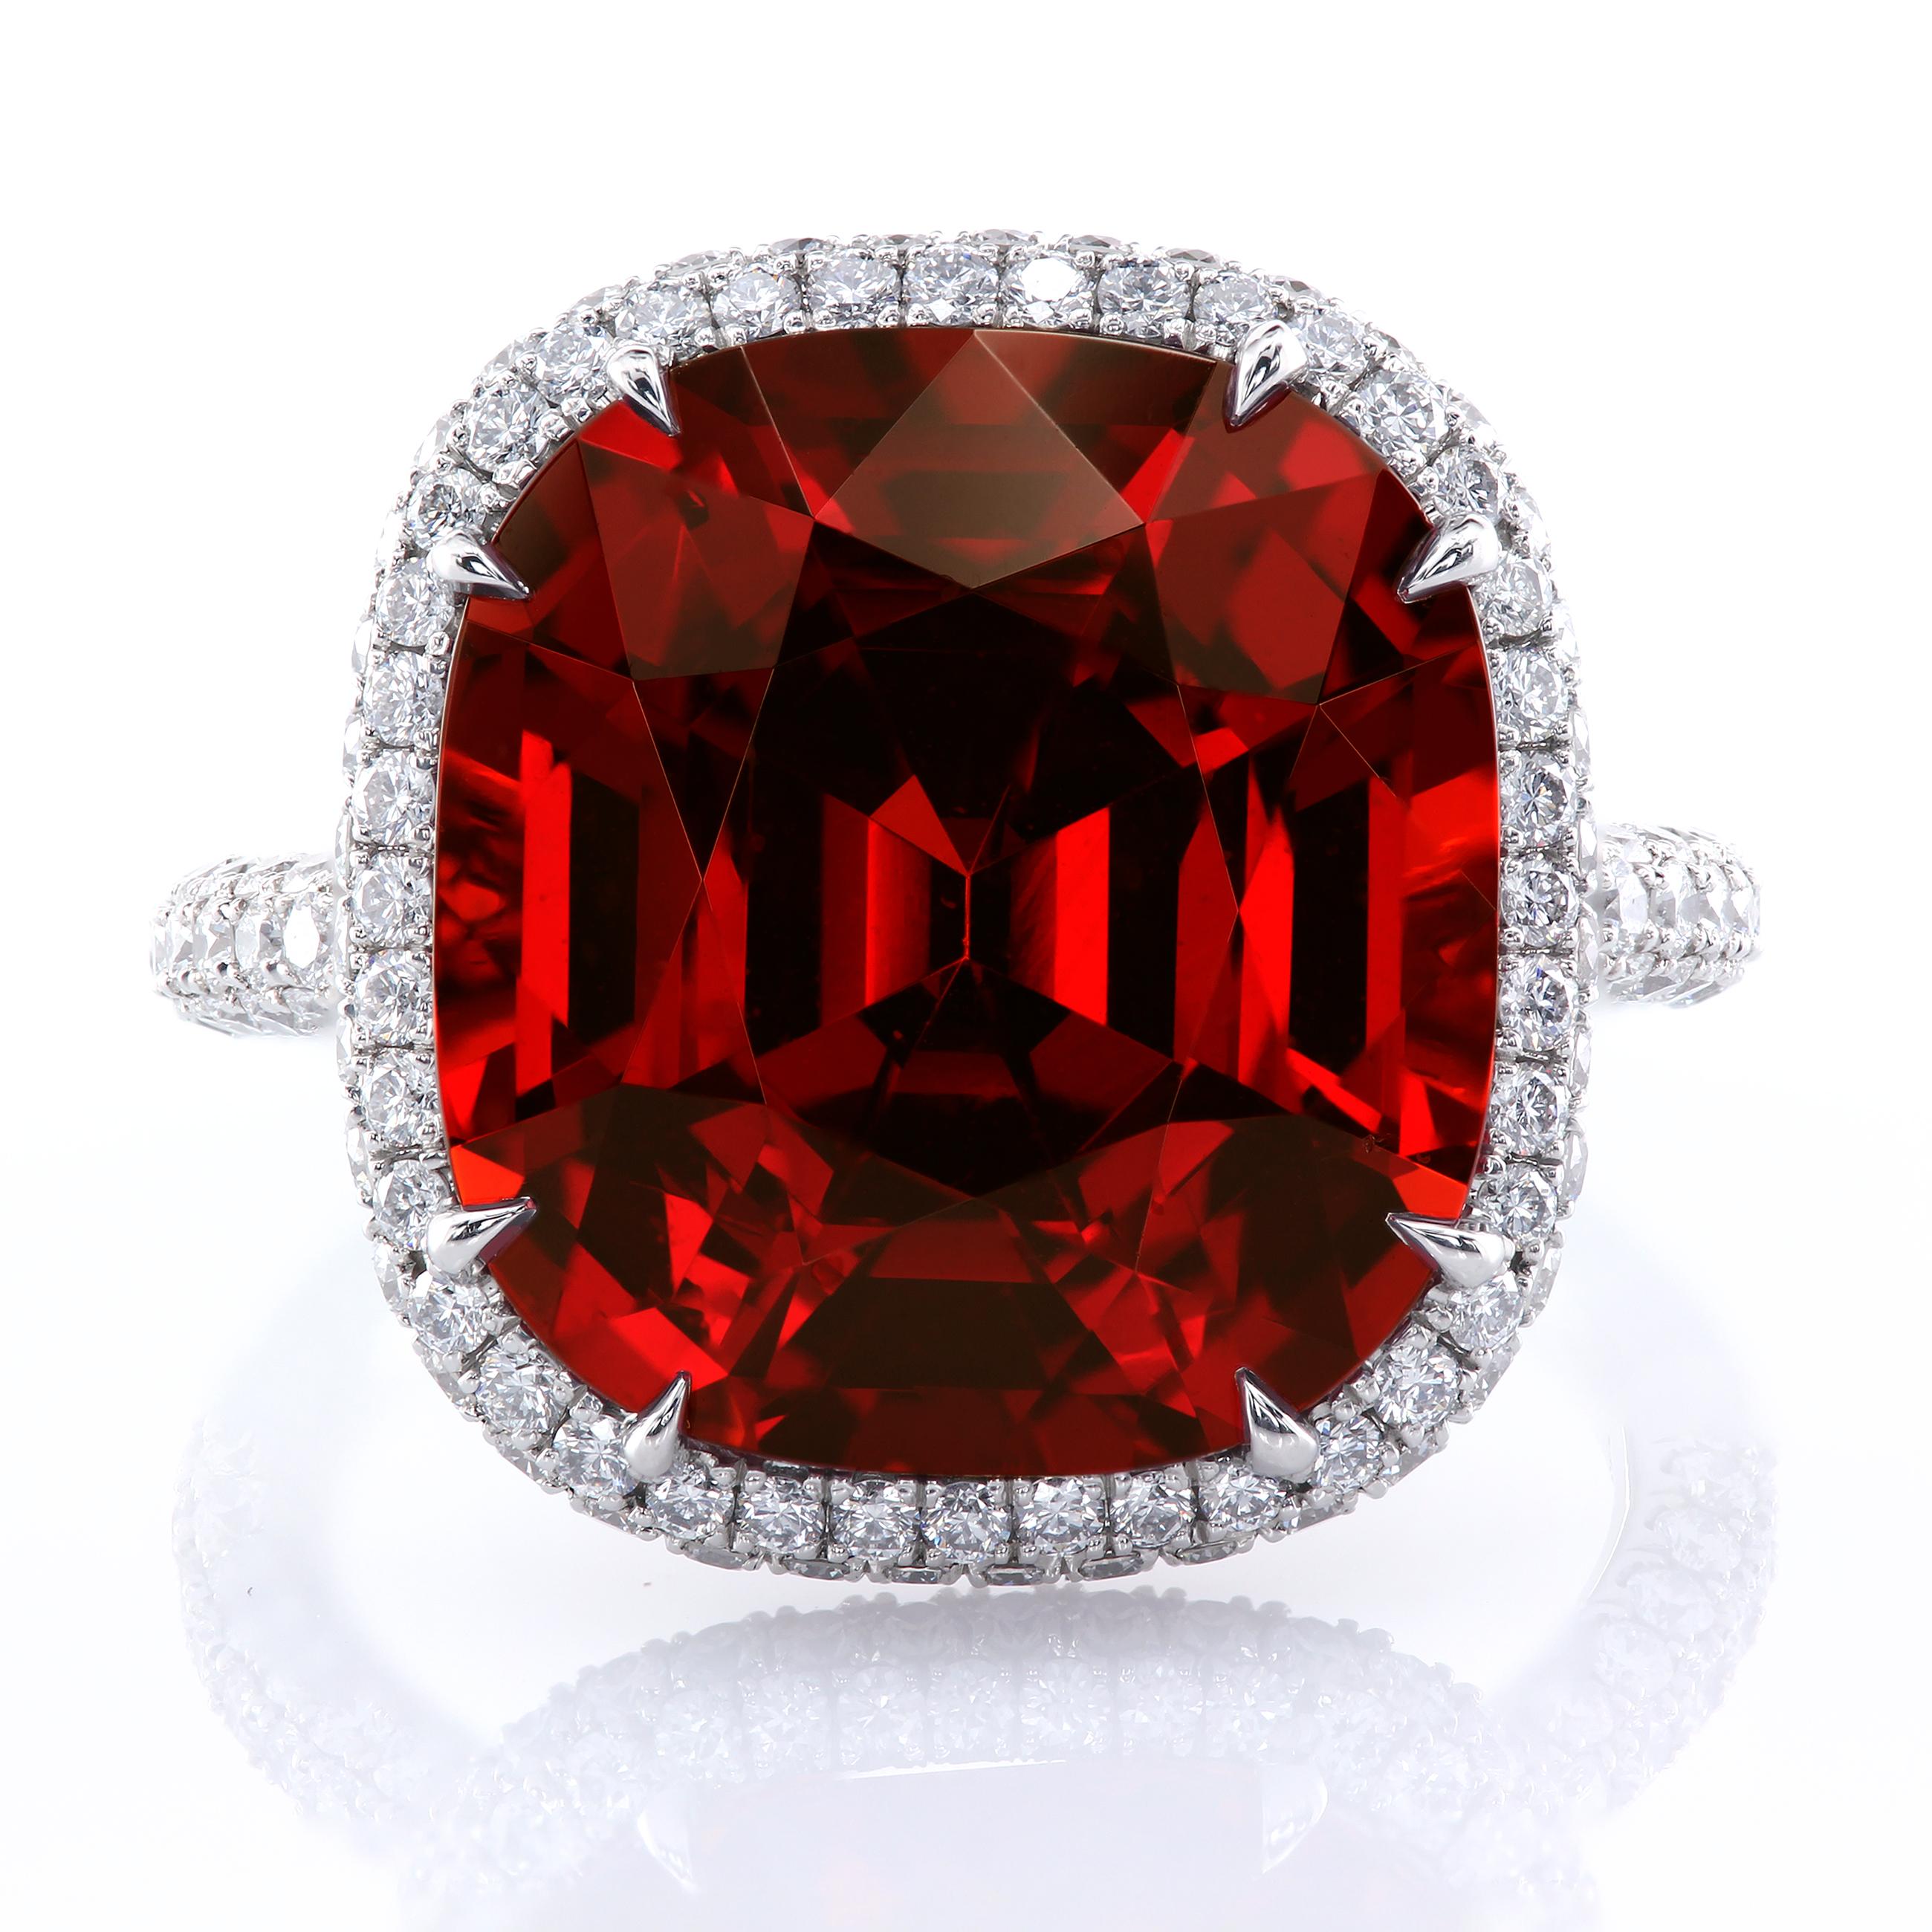 Bohemian sangria-colored 13.63-carat garnet in a multi-row statement ring. The intricate micro pave details are encrusting the ring's basket, halo, and shank. The rare crystal clear Spessartine garnet is certified by the GIA 6173149396. The ring is